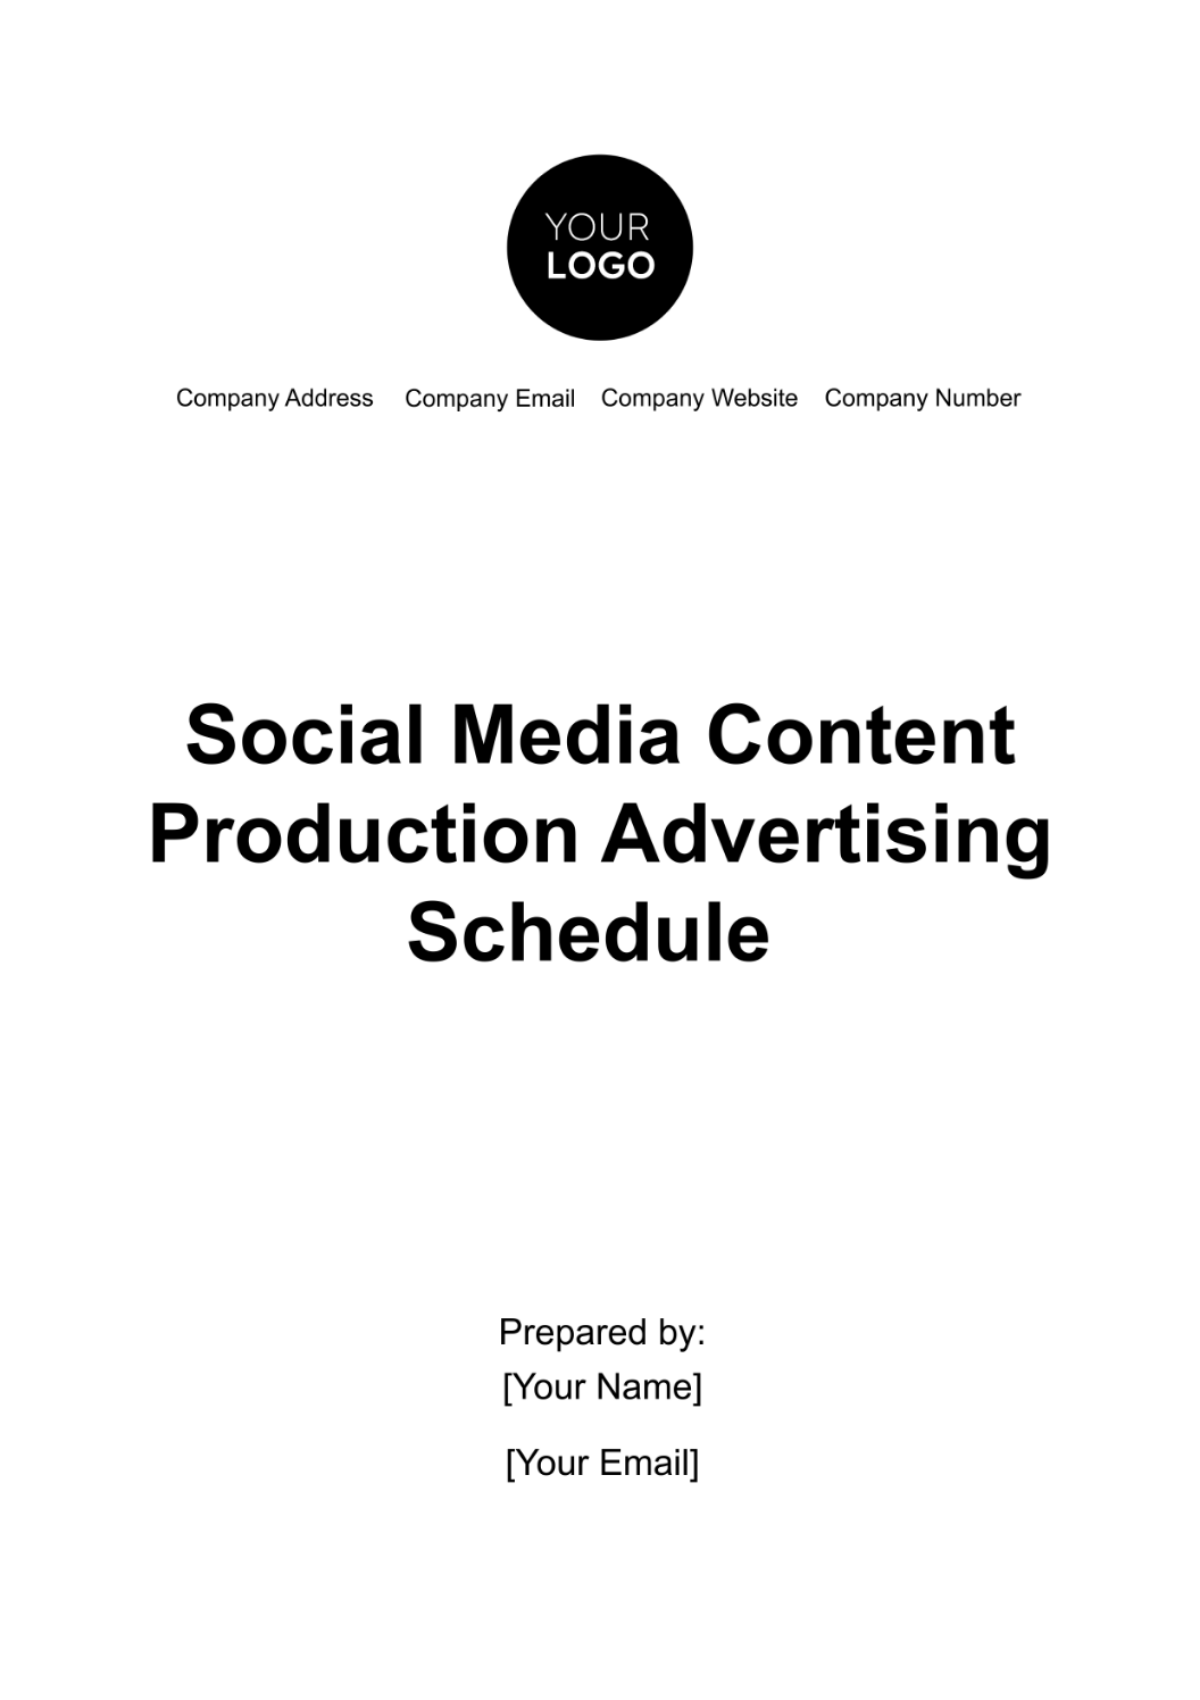 Social Media Content Production Advertising Schedule Template